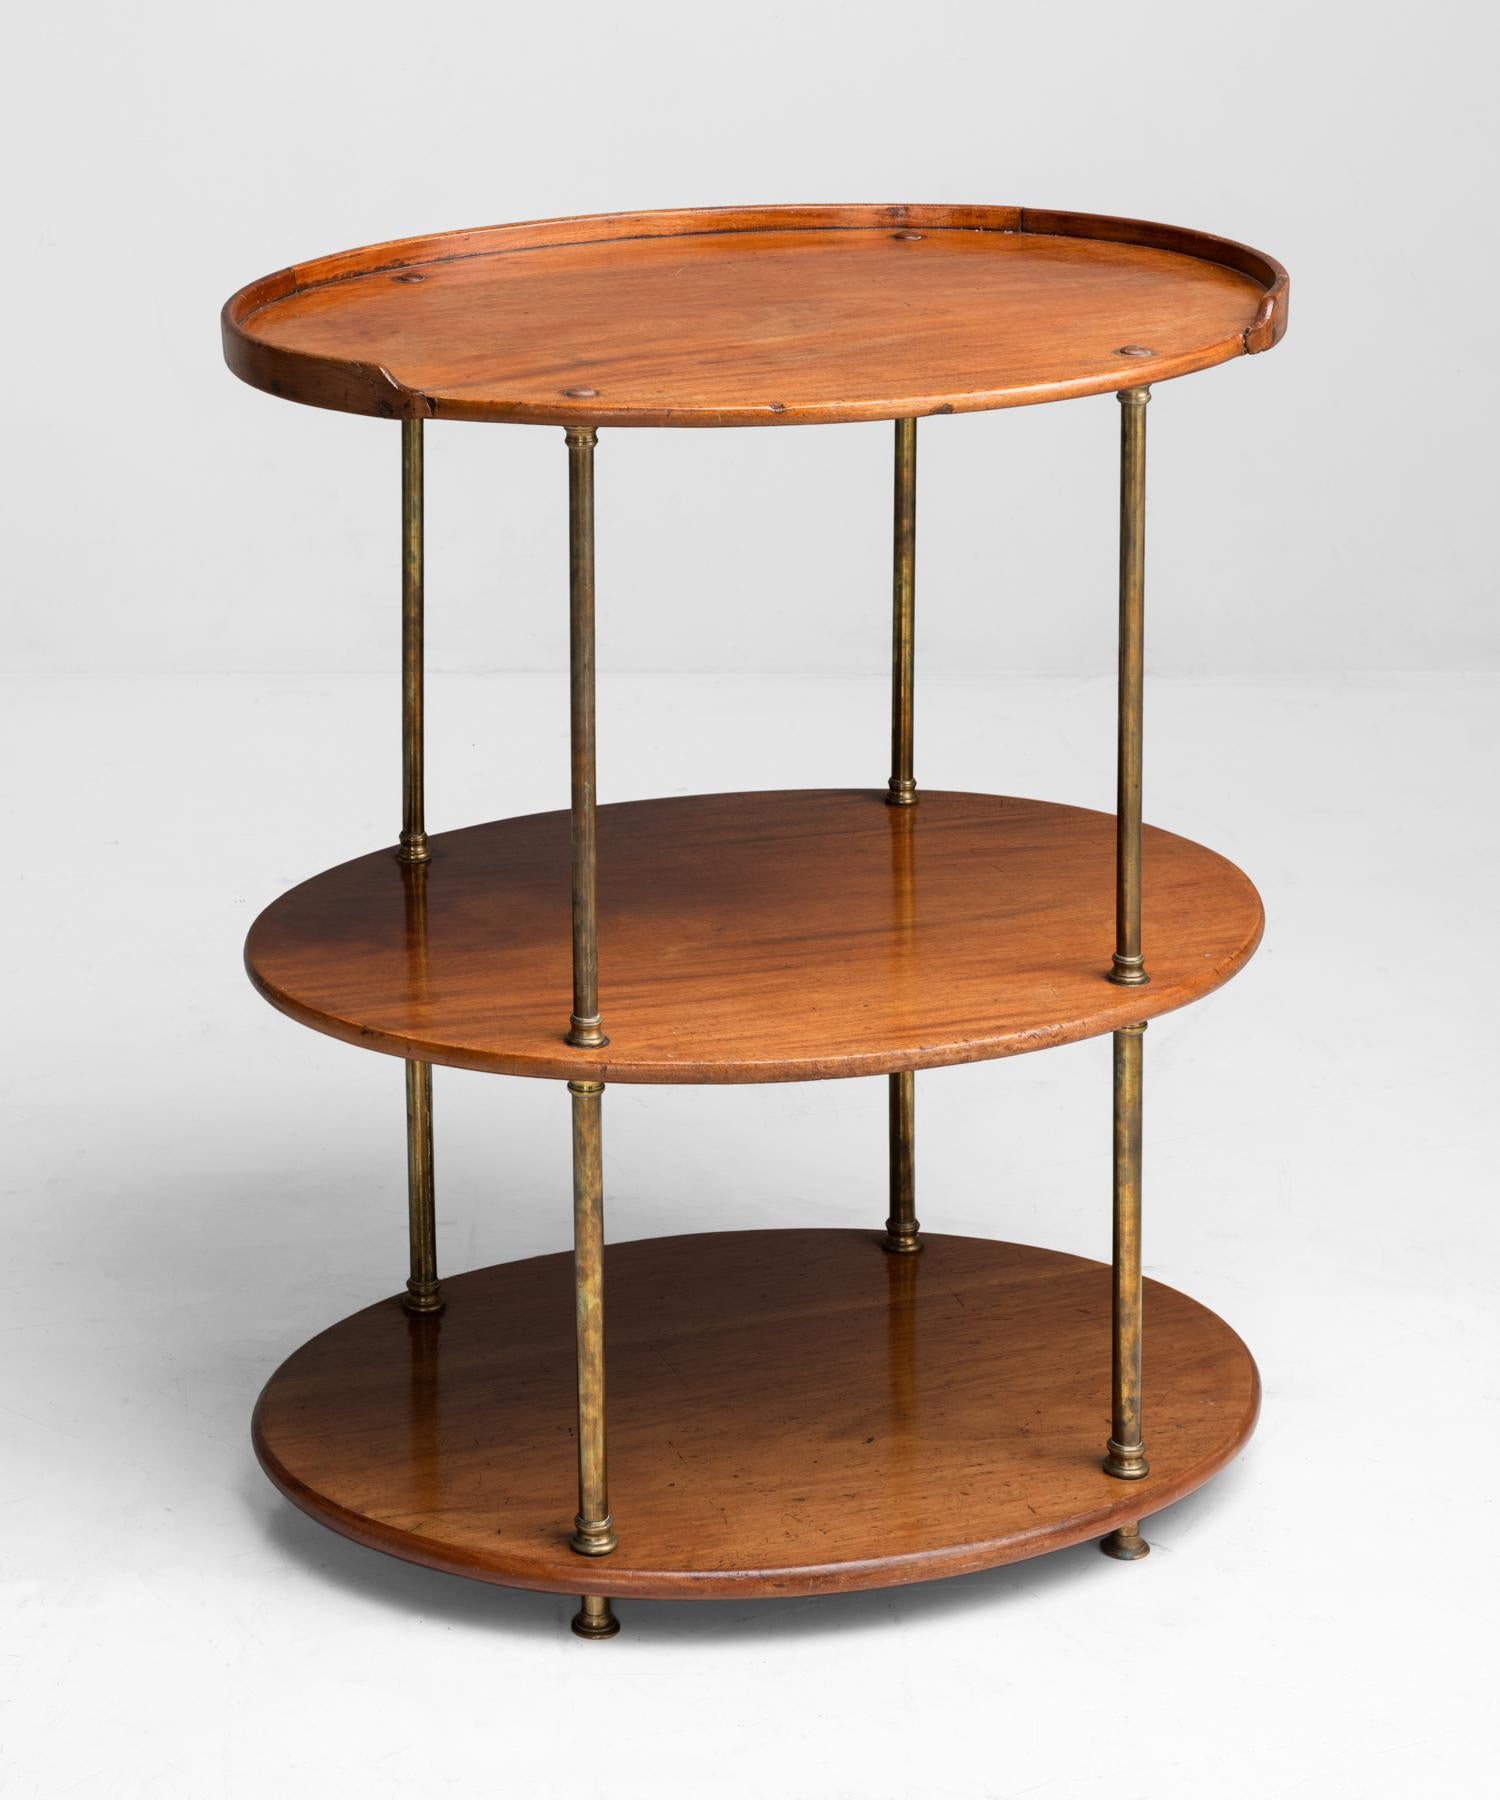 Campaign Shelving Unit, England, circa 1900

Oval shaped shelves in mahogany with brass column supports.